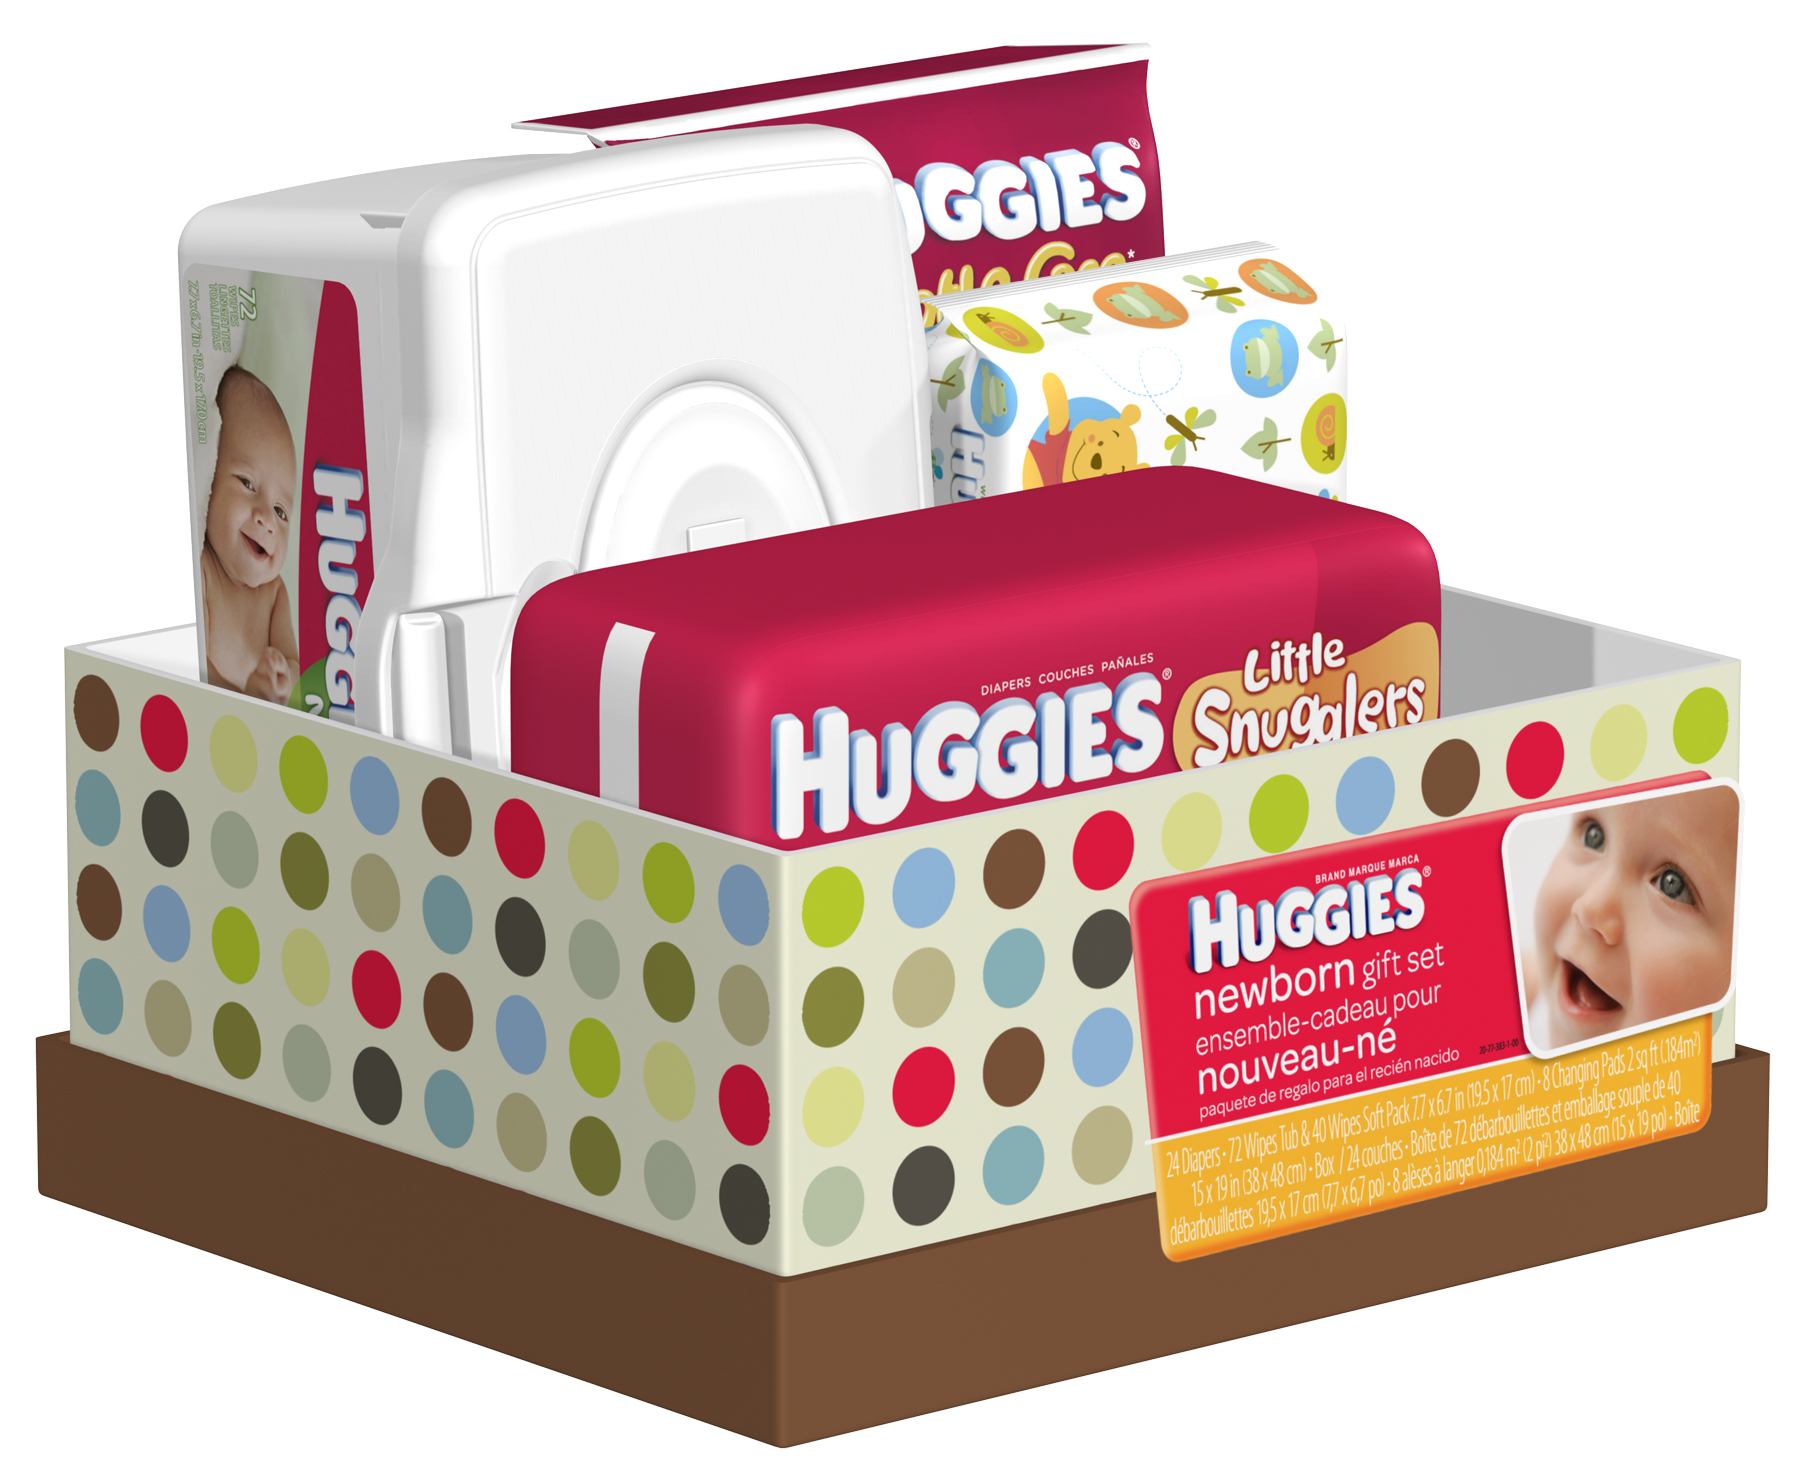 Canadian Coupons: New Huggies Printable Coupons Available Through